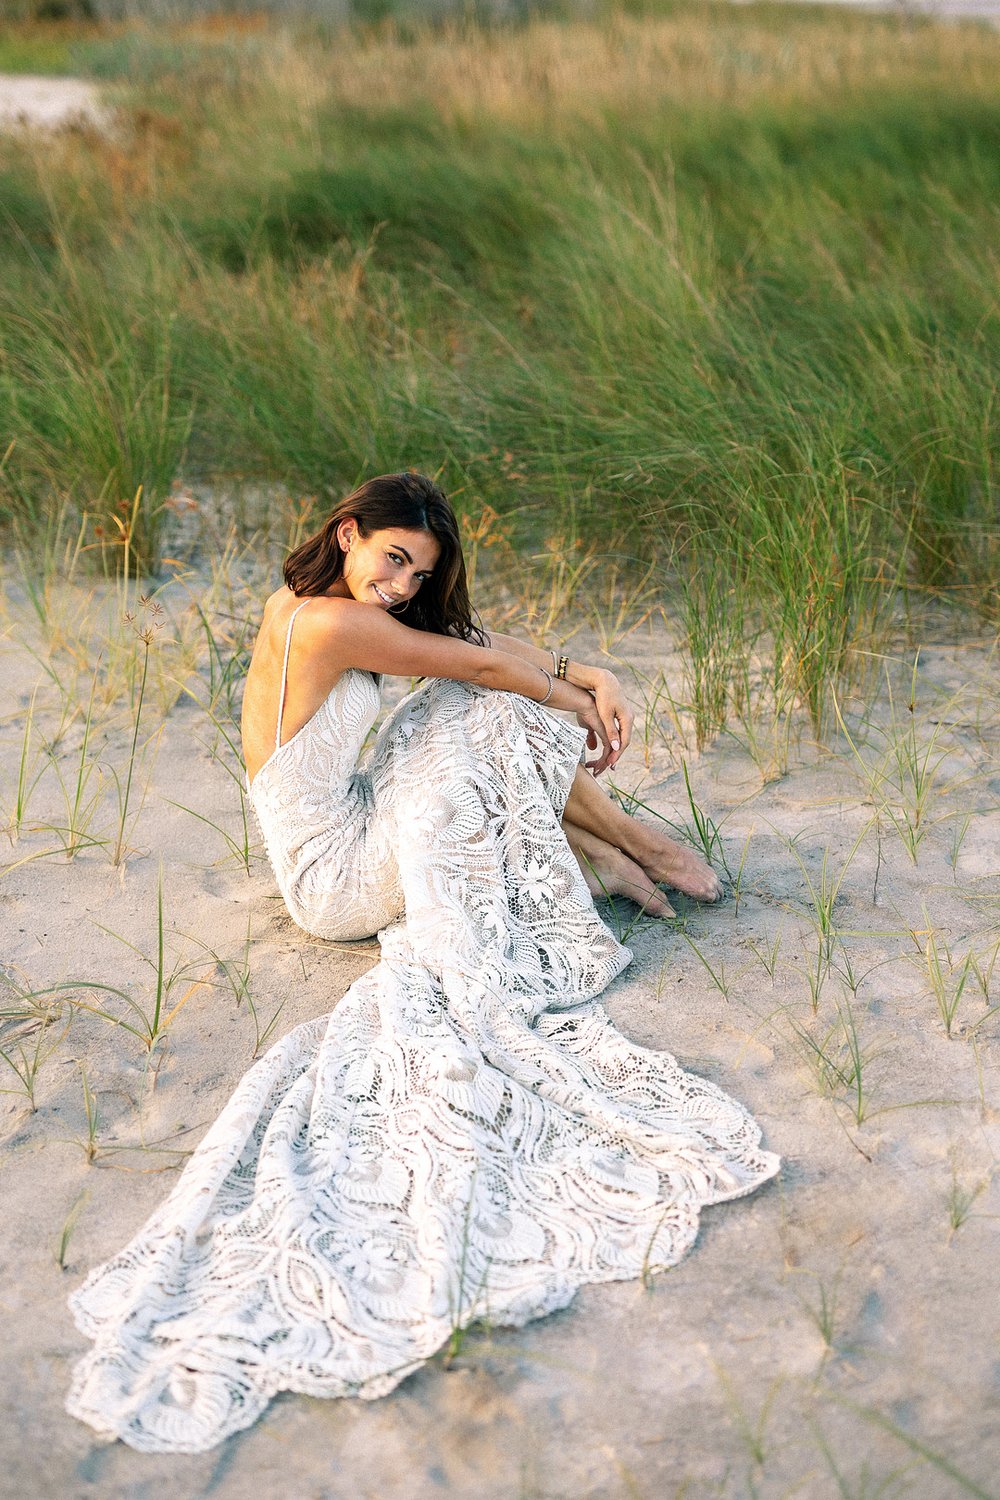 A beachy bridal moment_Carly Terry Photography_AW BRIDAL-0352_low.jpg